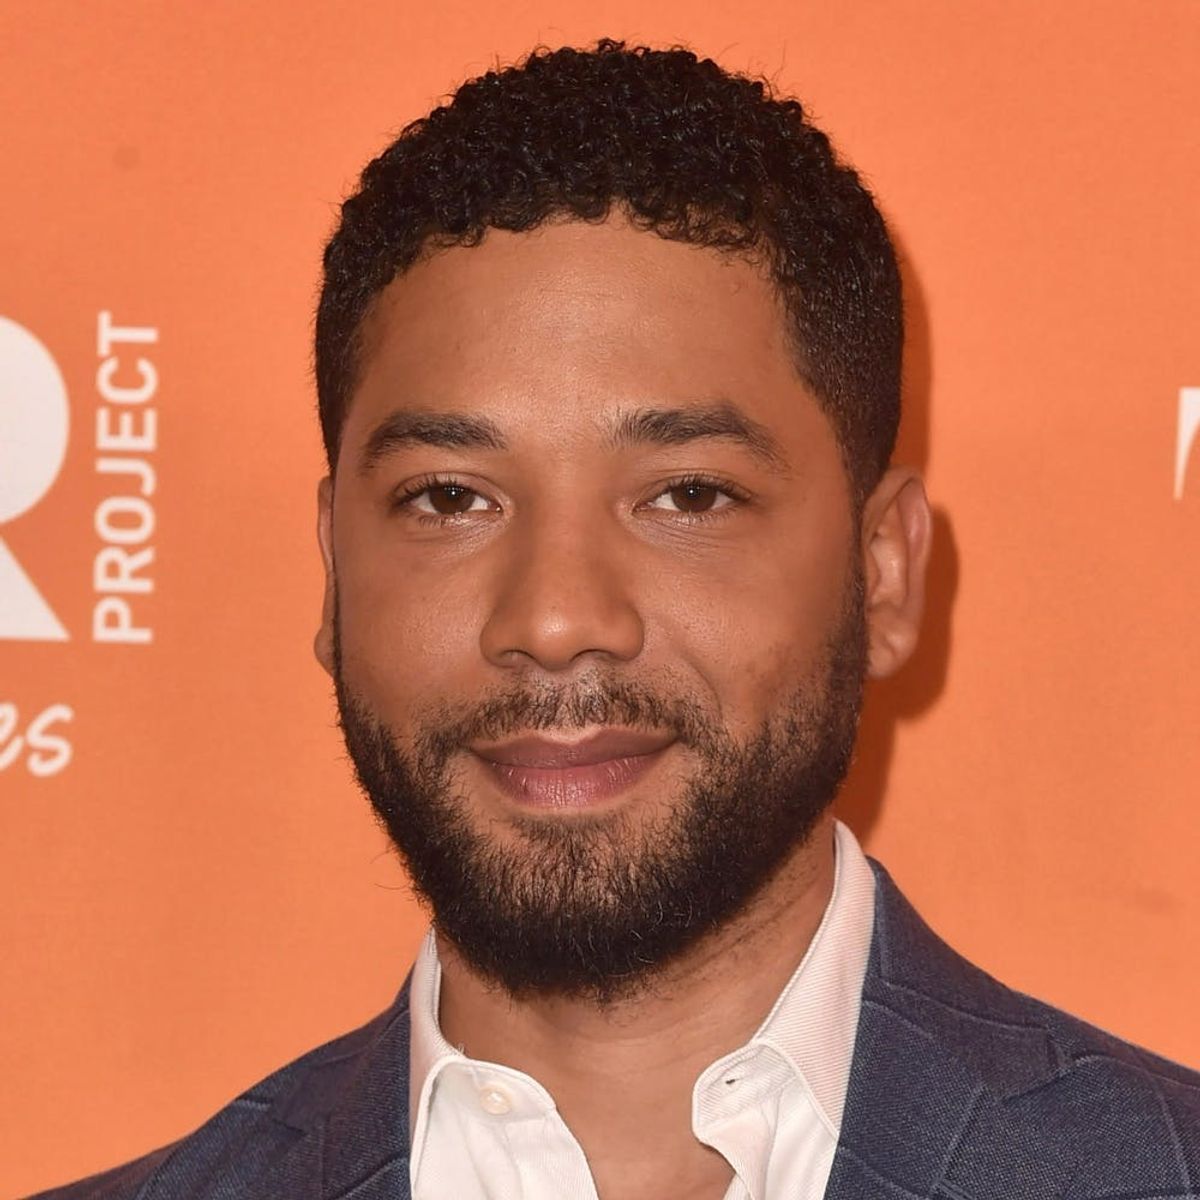 Possible Hate Crime Against ‘Empire’ Star Jussie Smollett Sends Shockwaves Through Hollywood